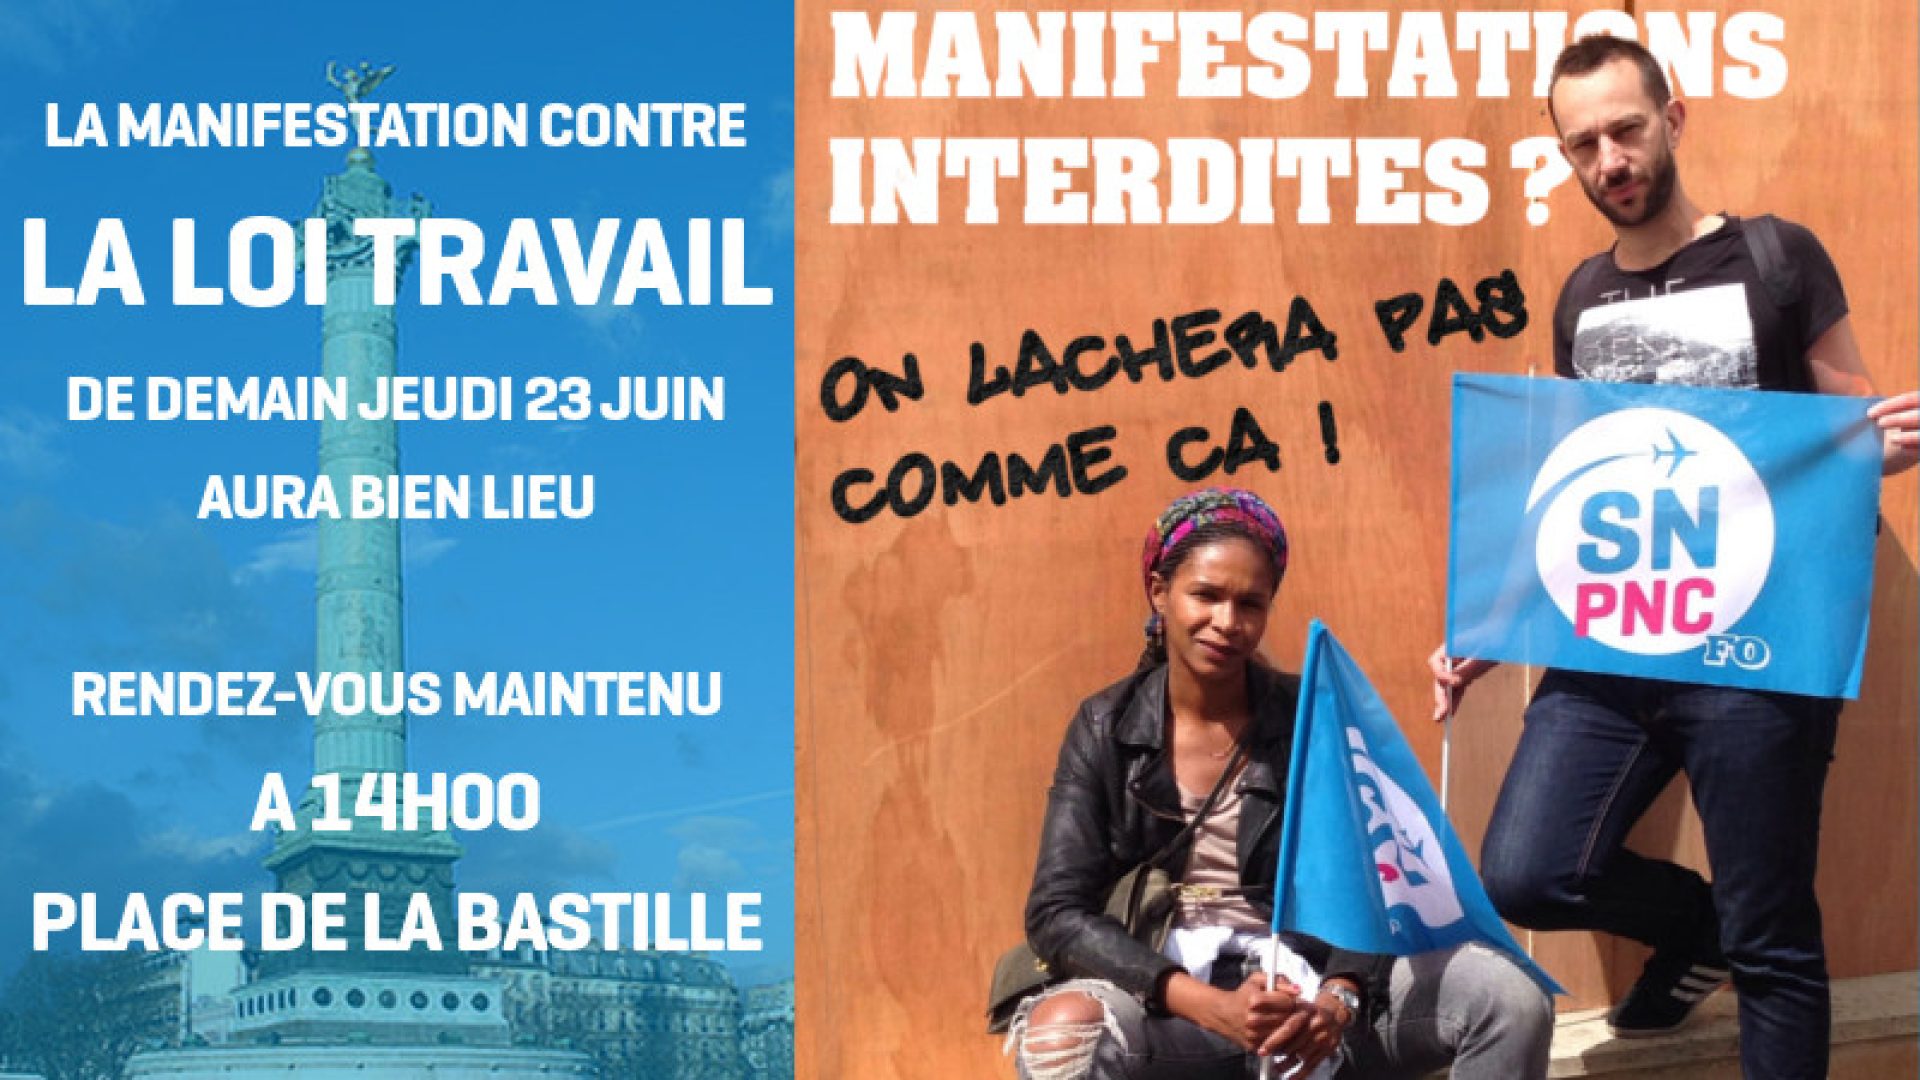 2688-cover-manif23oksite